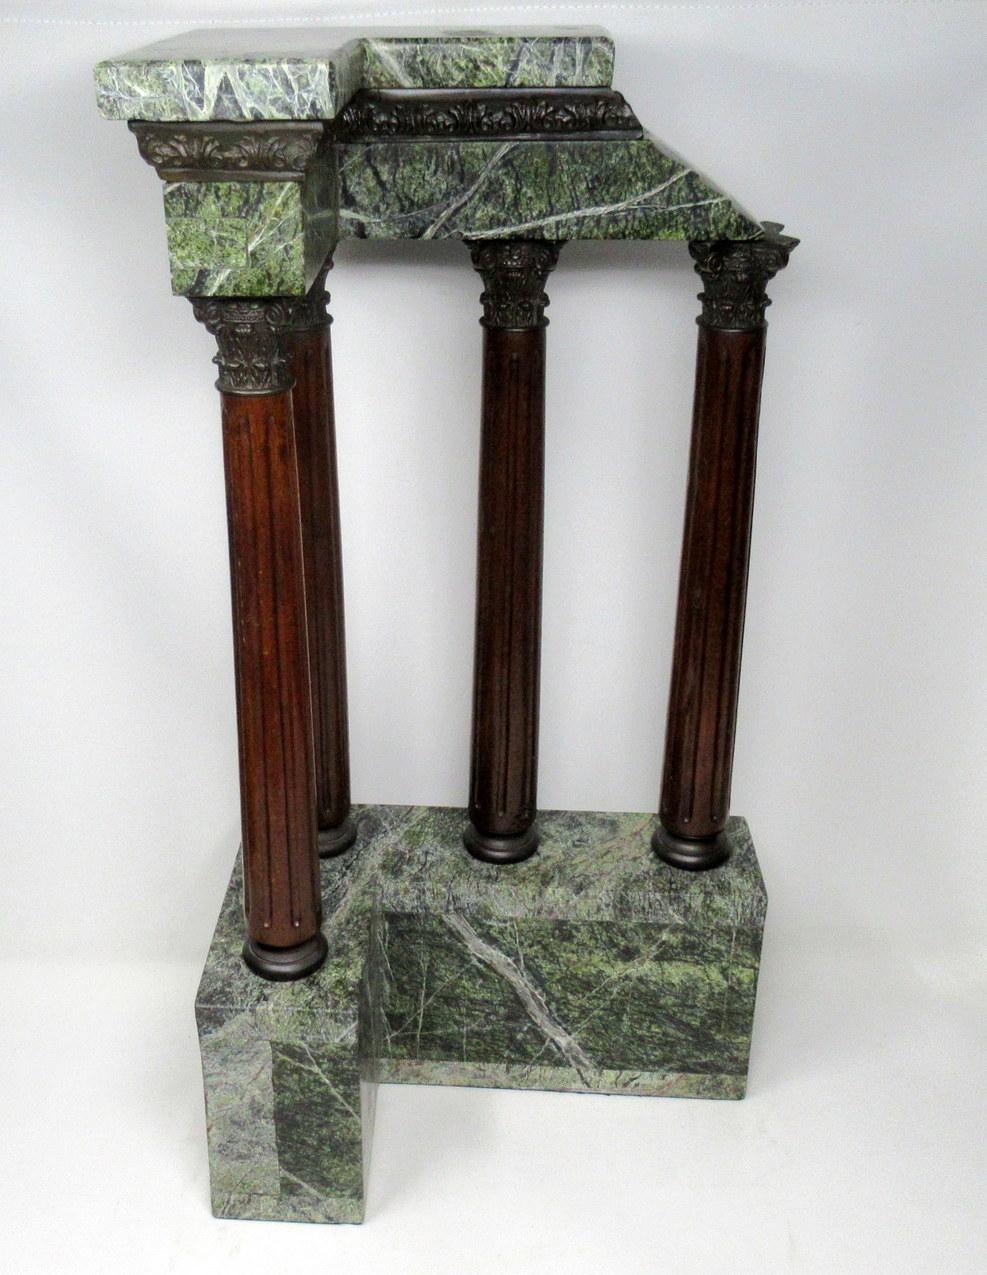 A very impressive example of an Italian Grand Tour inlaid marble and bronze mounted architectural element modeled after a classical early Roman Temple,
last half of the 19th century. 

This rare and unusual corner ruin features four carved wooden